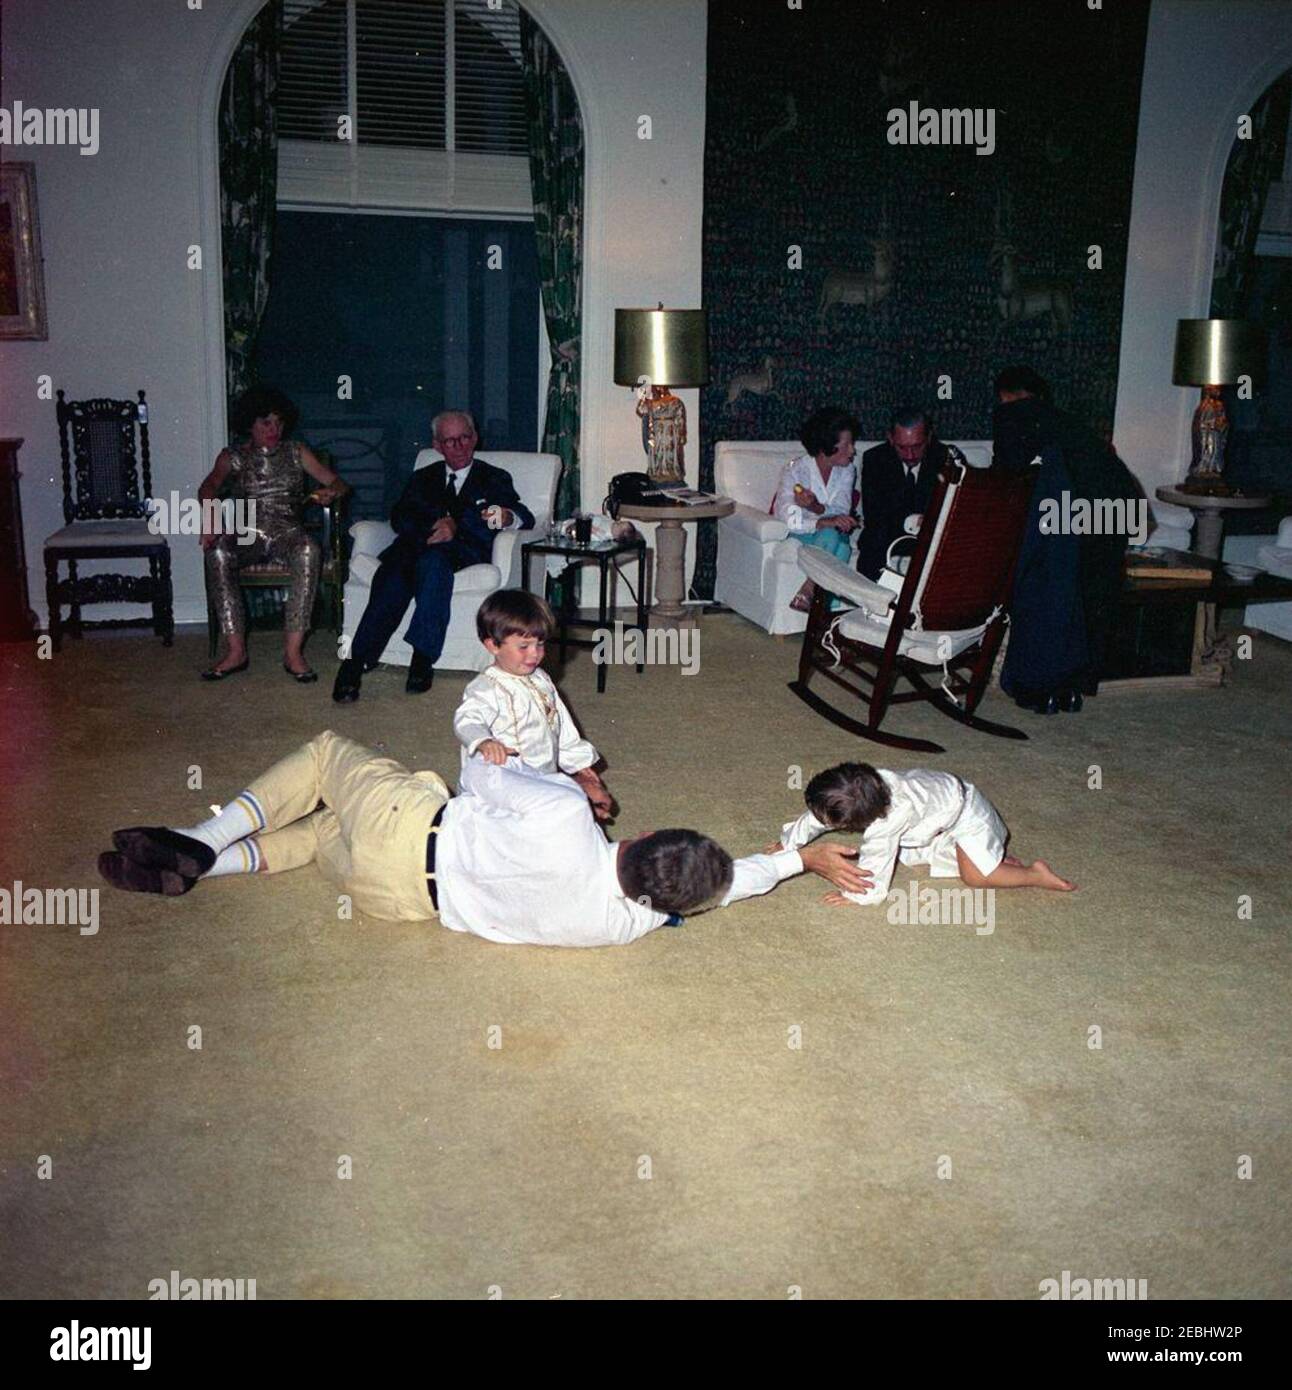 Christmas Day, Palm Beach. President John F. Kennedy (lying on floor) plays with his son, John F. Kennedy, Jr. (right), and nephew, Anthony Radziwill (left), on Christmas. Seated in background (L-R): Eunice Kennedy Shriver, Joseph P. Kennedy, Sr., Rose Fitzgerald Kennedy, and Prince Stanislaus Radziwill of Poland. Residence of C. Michael Paul, Palm Beach, Florida. Stock Photo